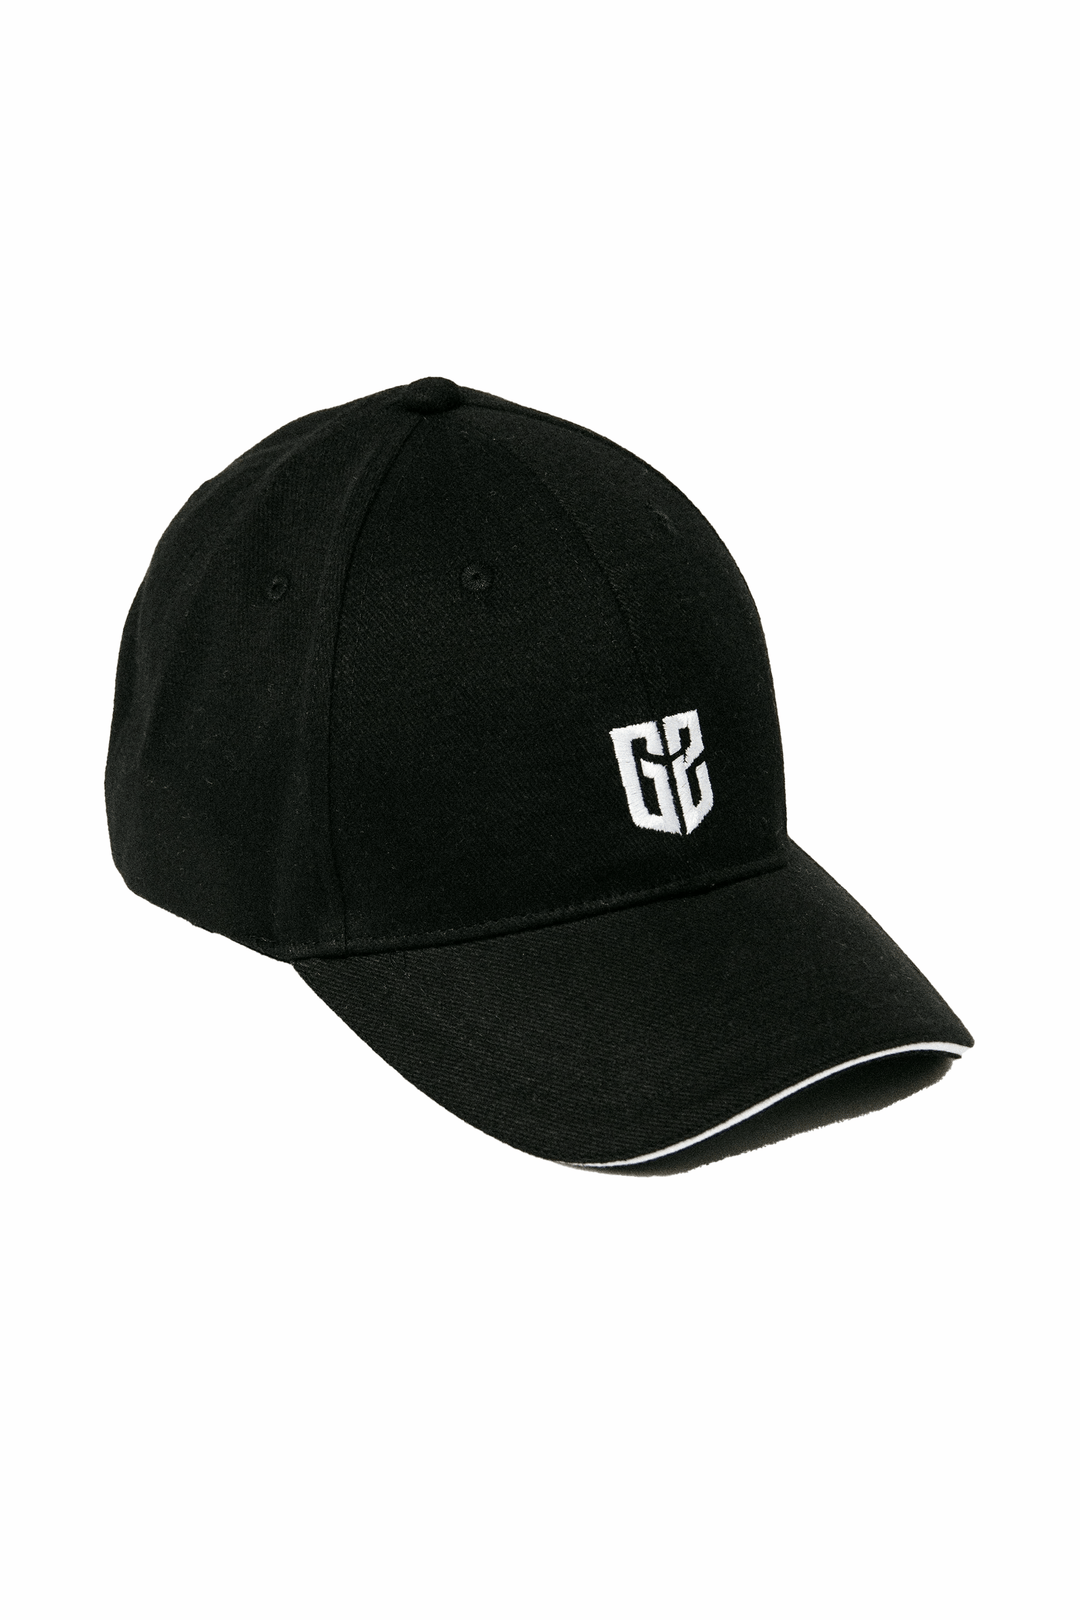 G2 Esports essentials snapback cap in black with D-ring closure. Show off your G2 pride with this stylish and adjustable esports team cap